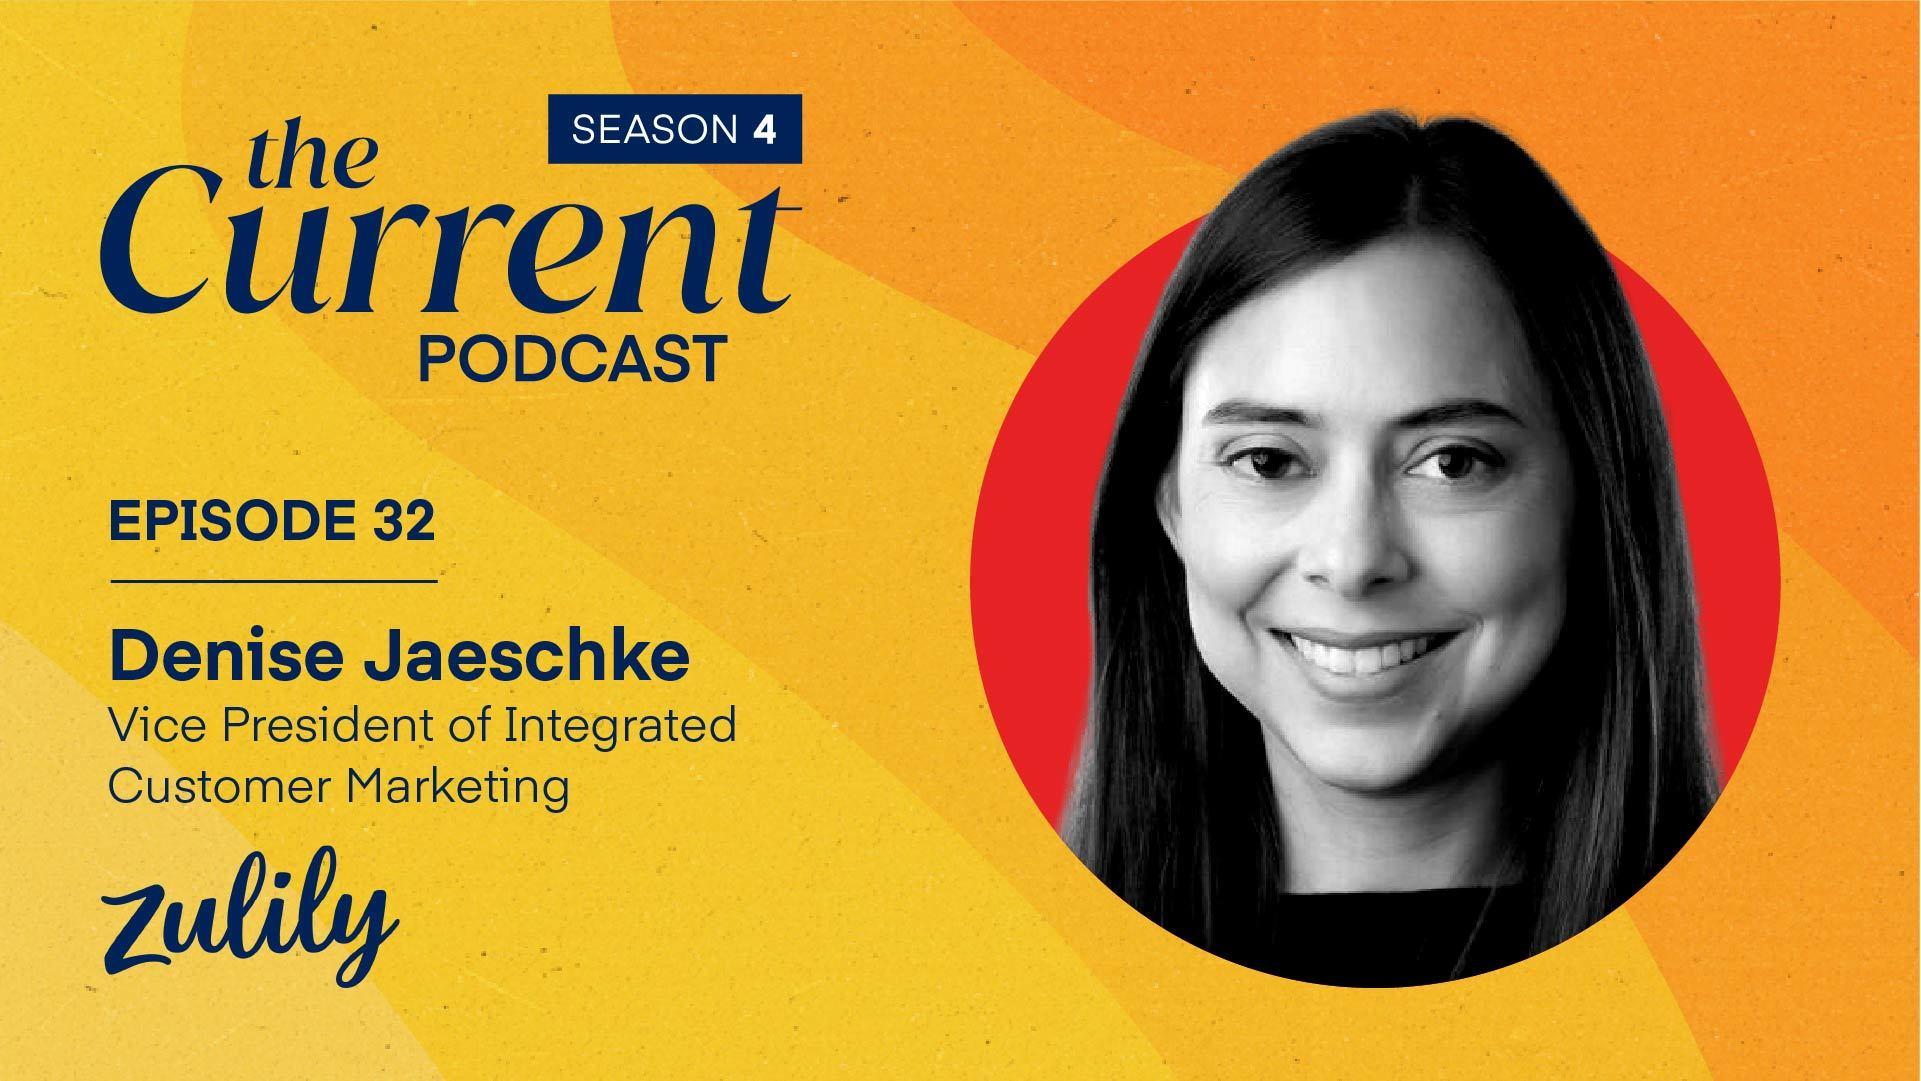 The Current Podcast: Zulily’s Denise Jaeschke